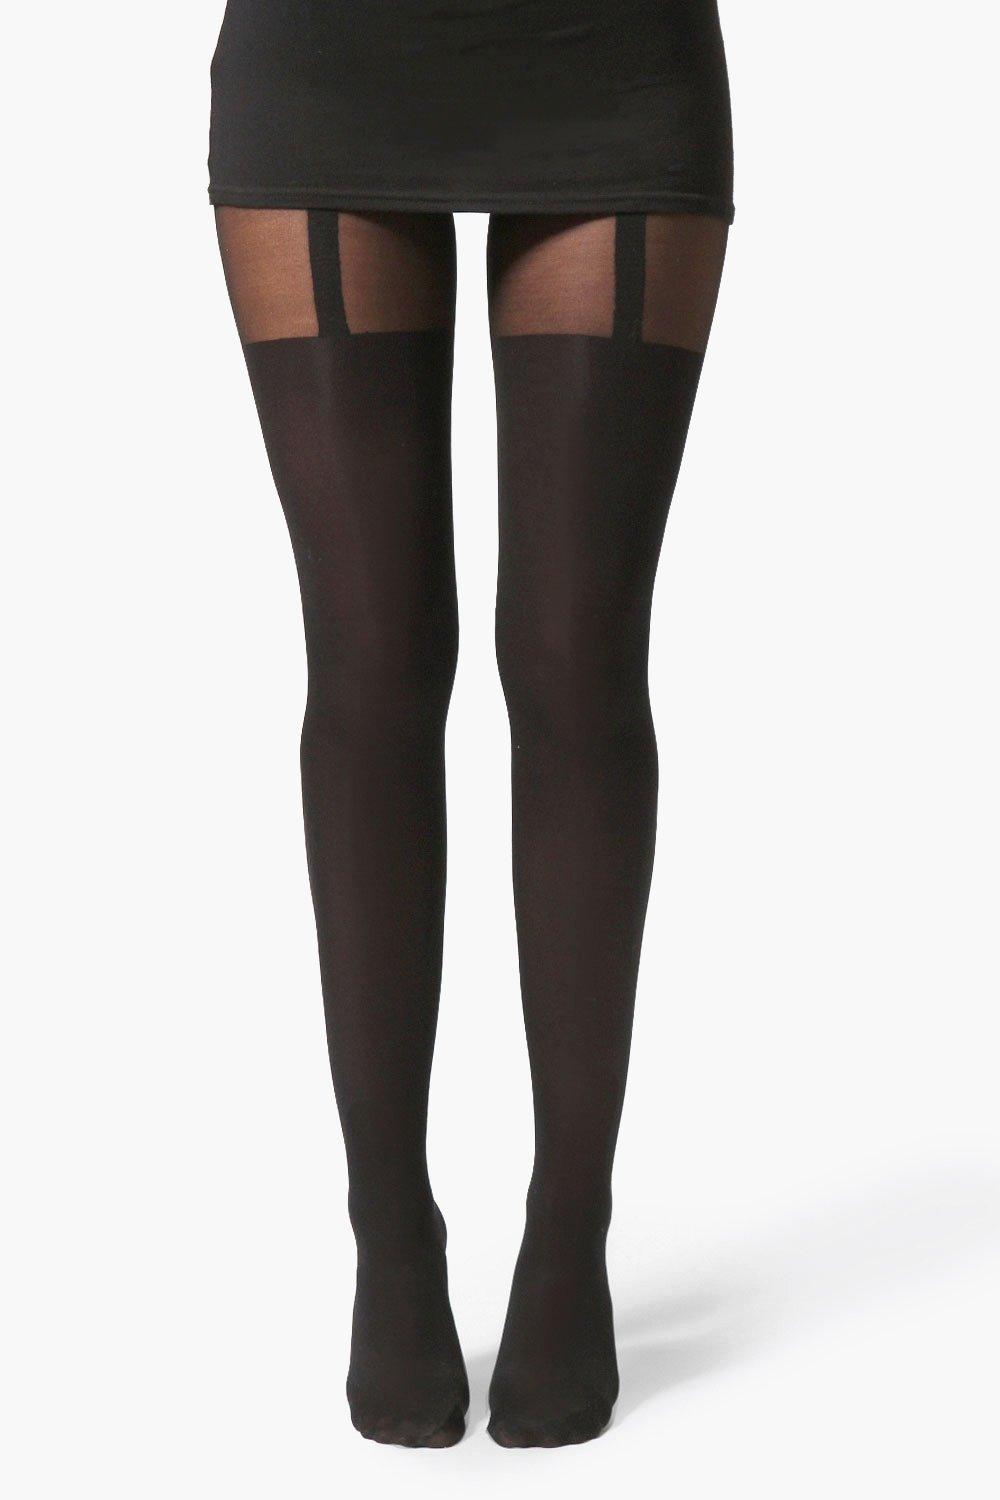 Suspender Tights - The Earth's Biggest Suspender Tights Store